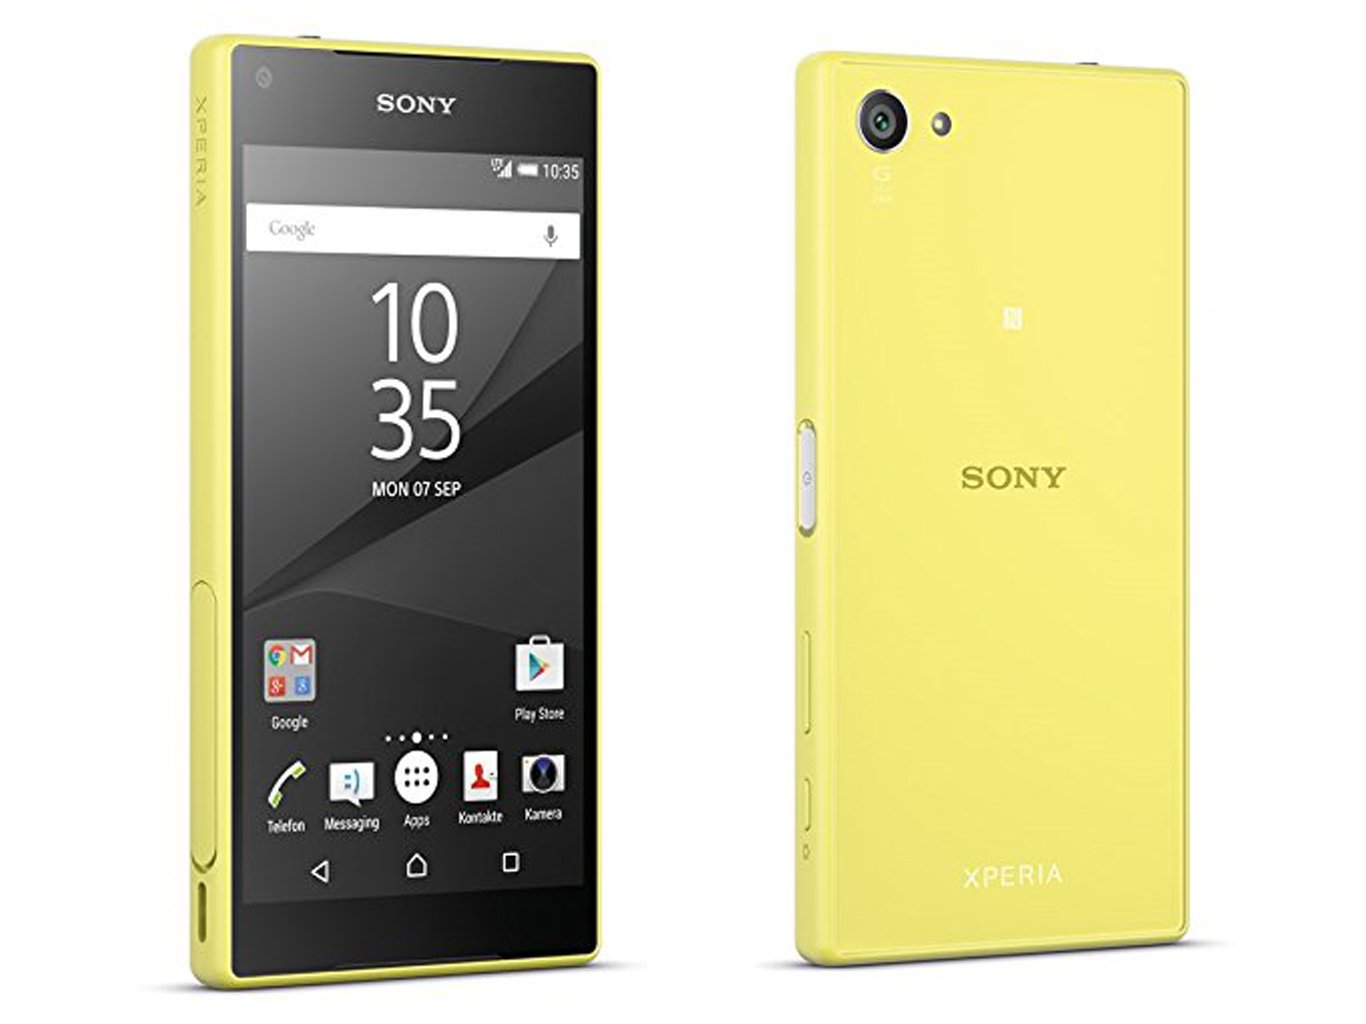 Elinor Gal on Twitter: "I'm loving my new #smartphone - #Sony #Xperia z5 compact. #Yellow is pretty. :-D / Twitter